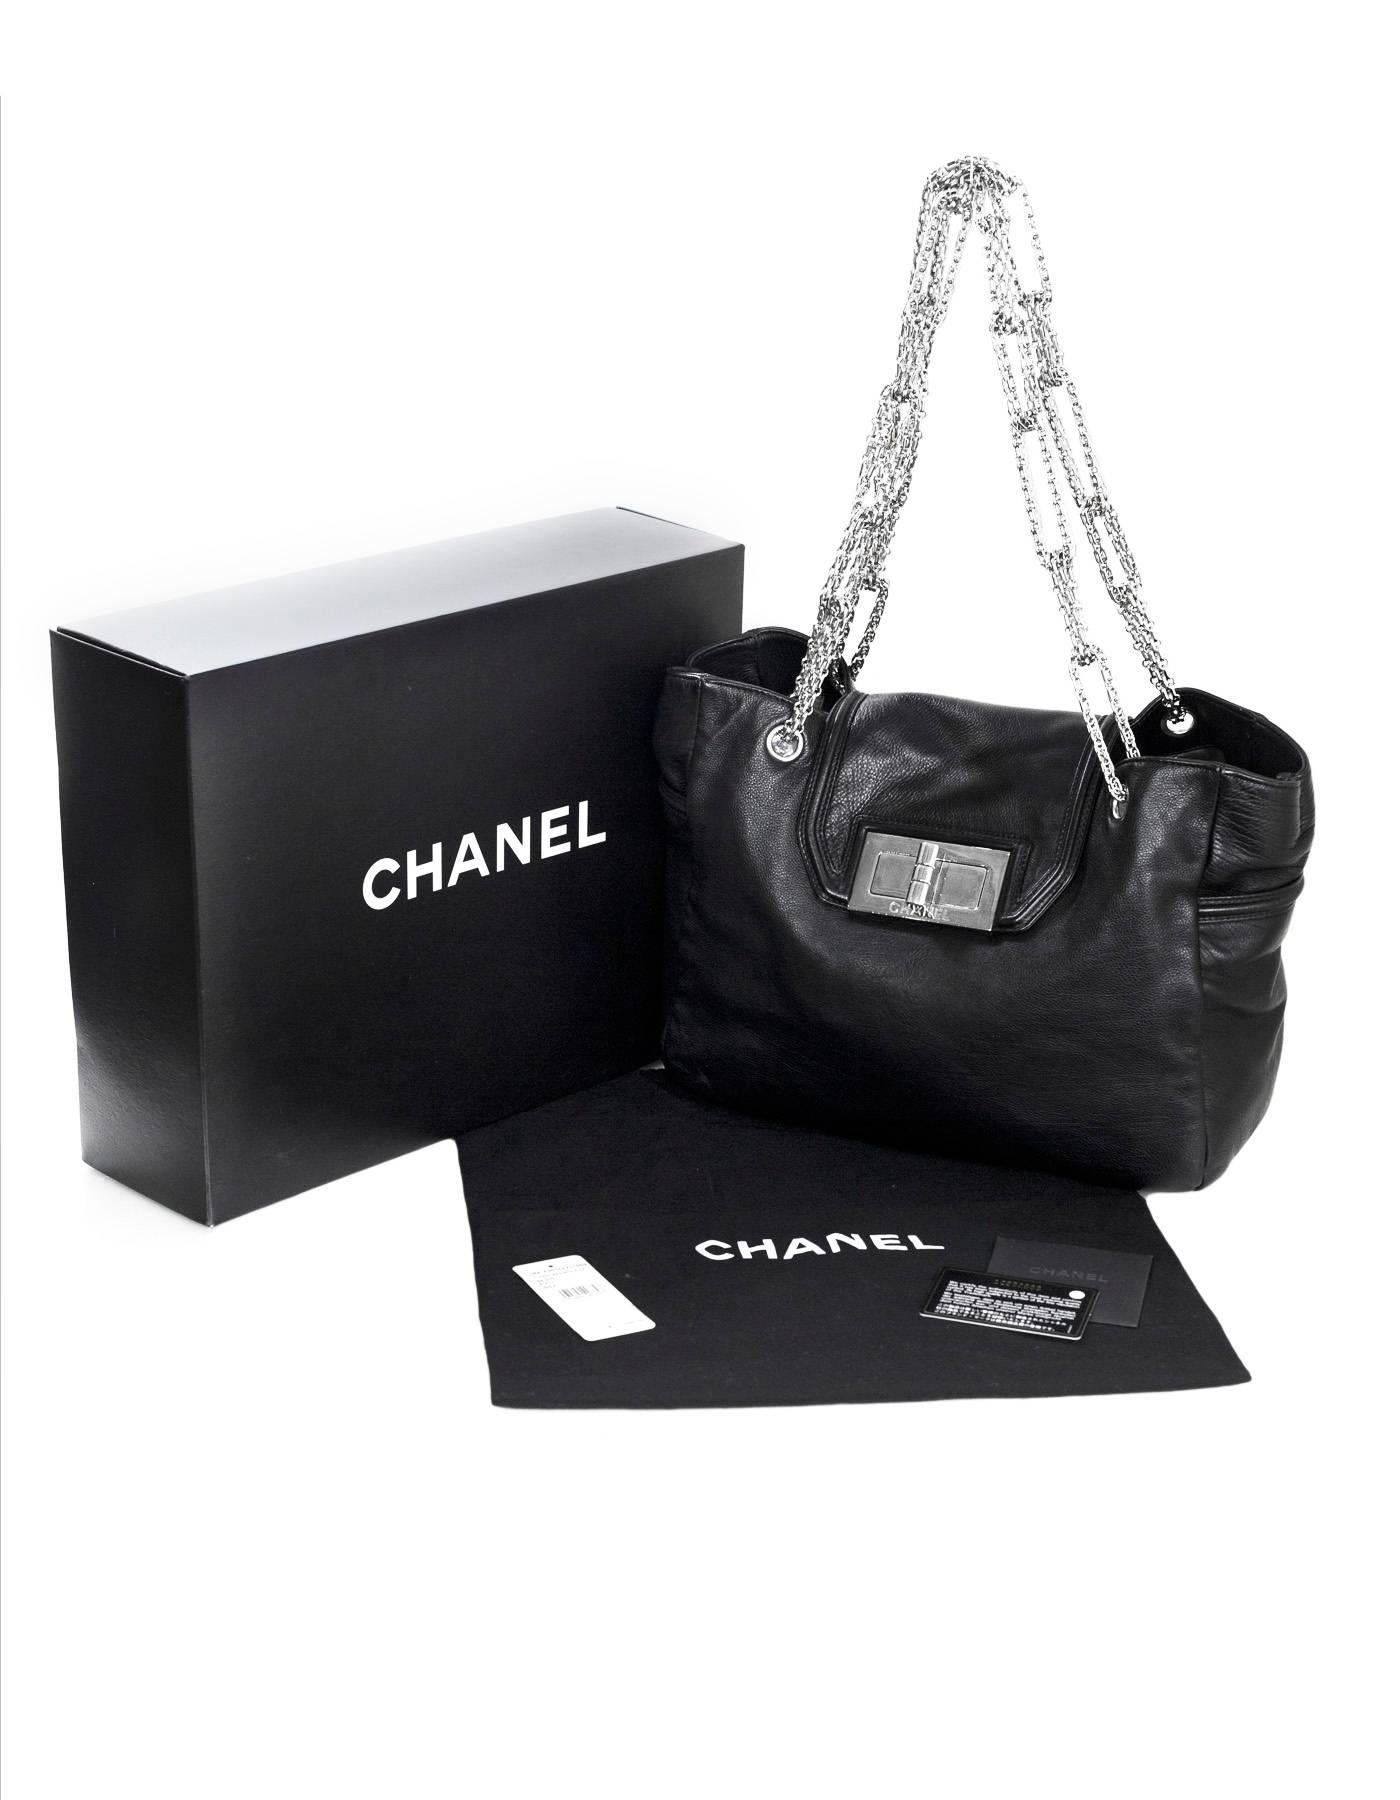 Chanel Black Leather 2.55 Reissue Lock Tote w/ Heavy Chain Straps rt. $3, 995 5